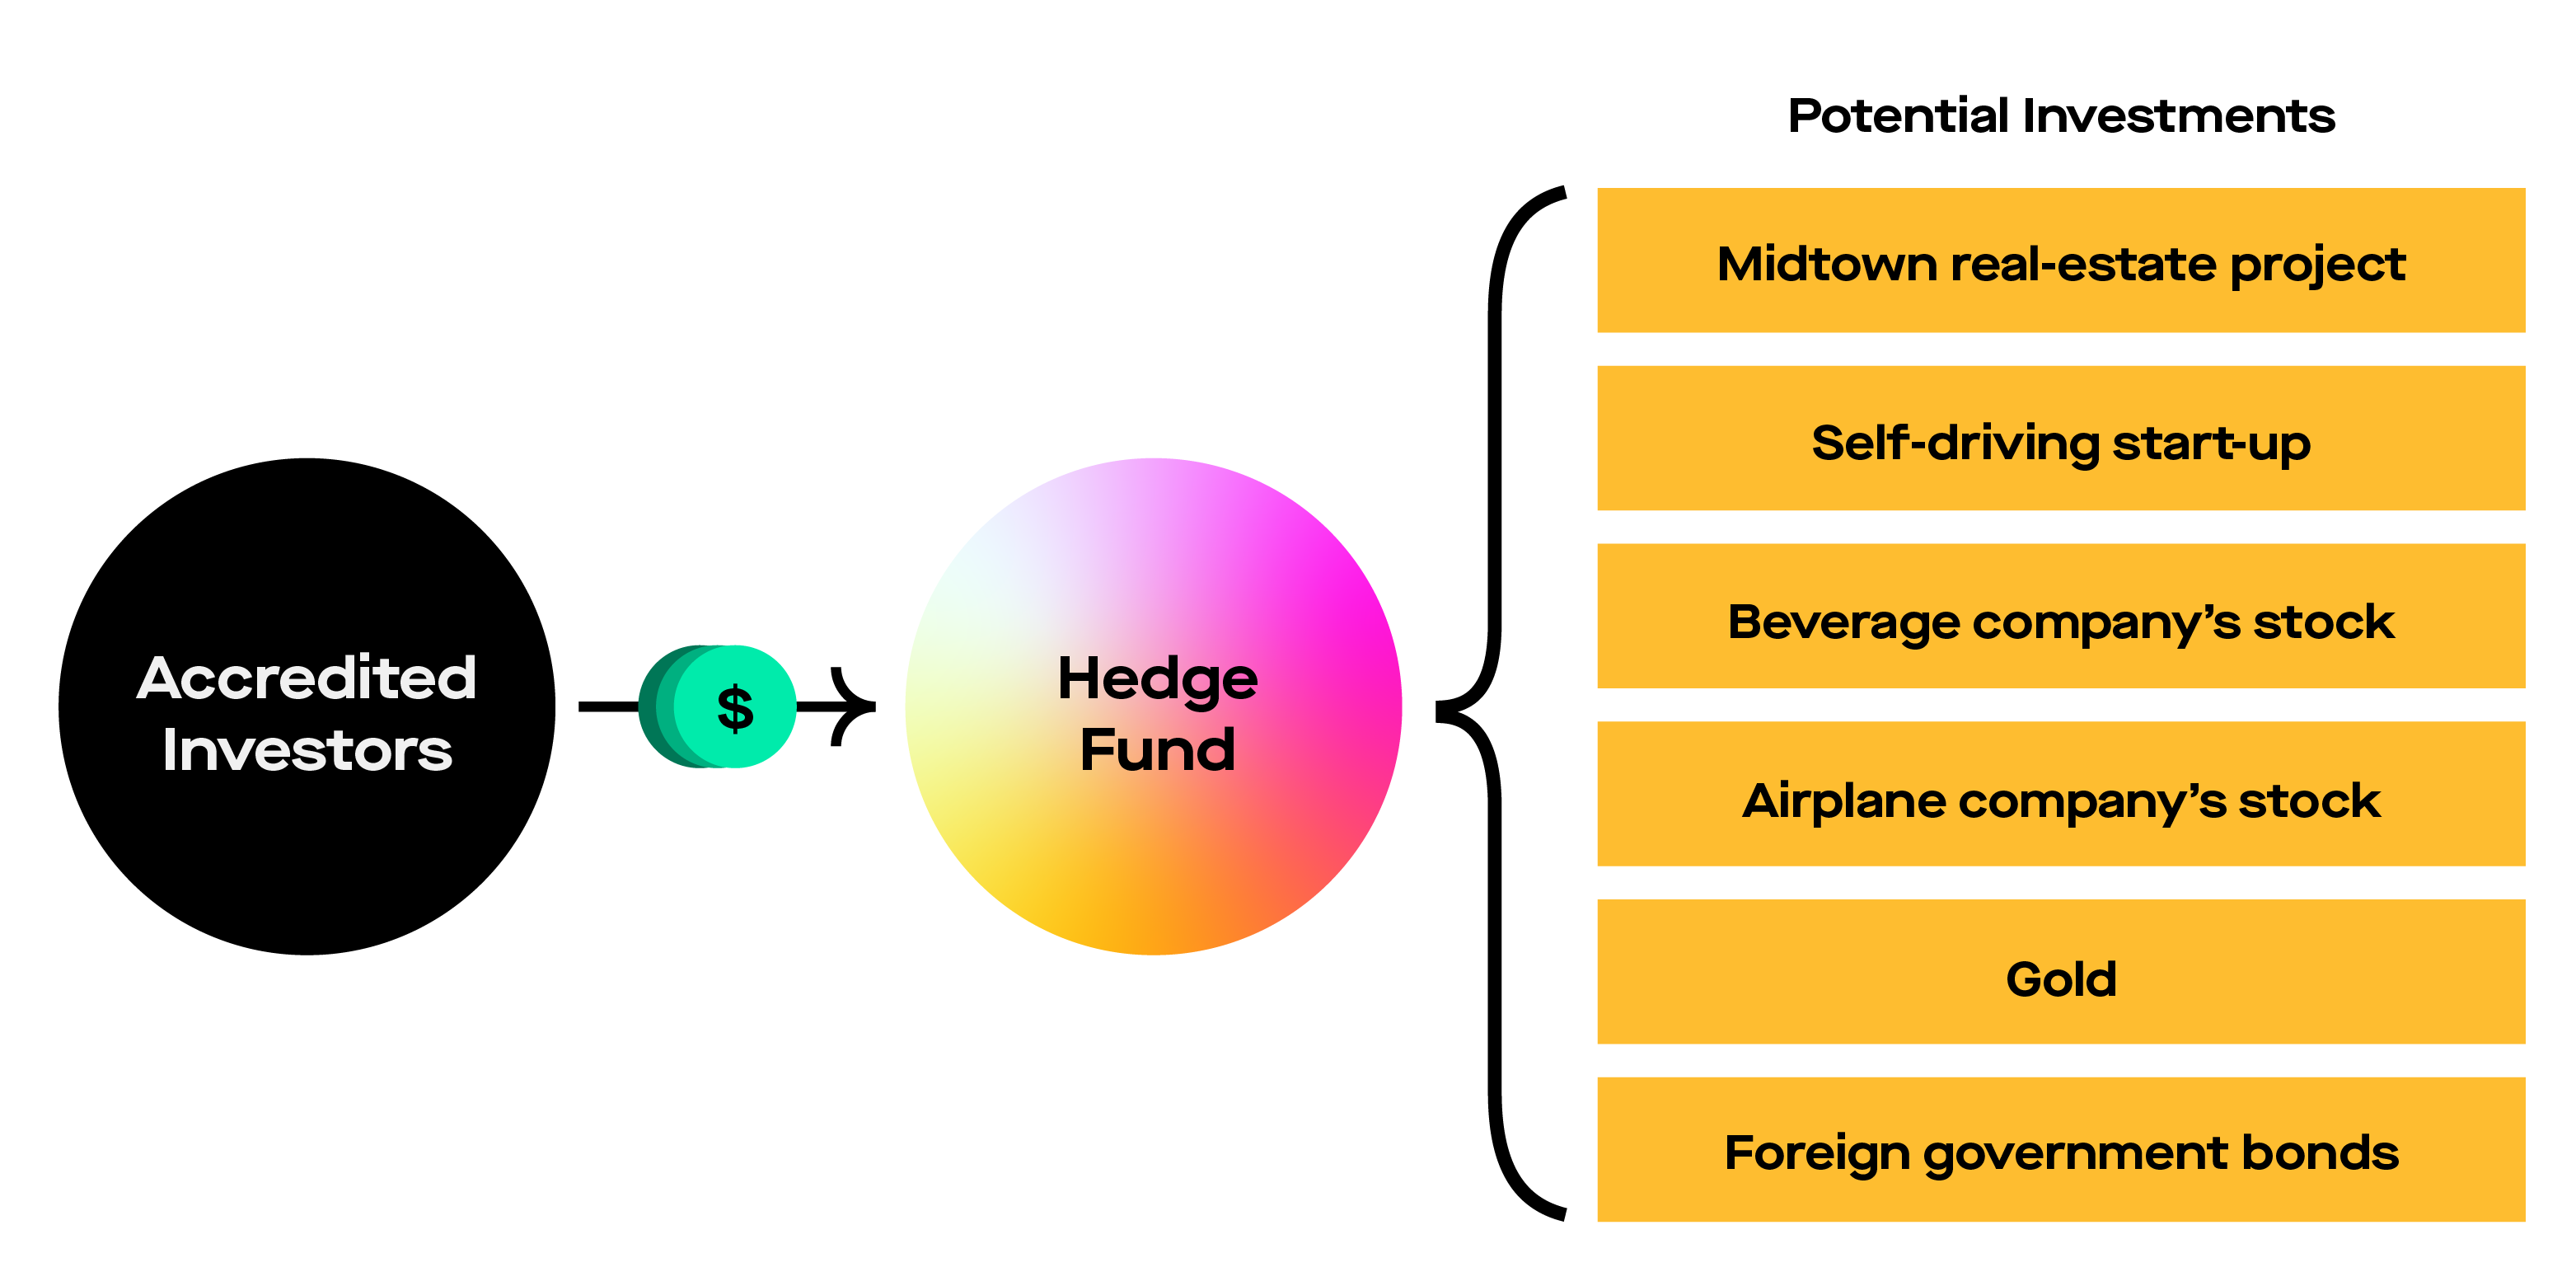 Where Can I Find A List Of Crypto Hedge Funds? / Popular Cryptocurrency